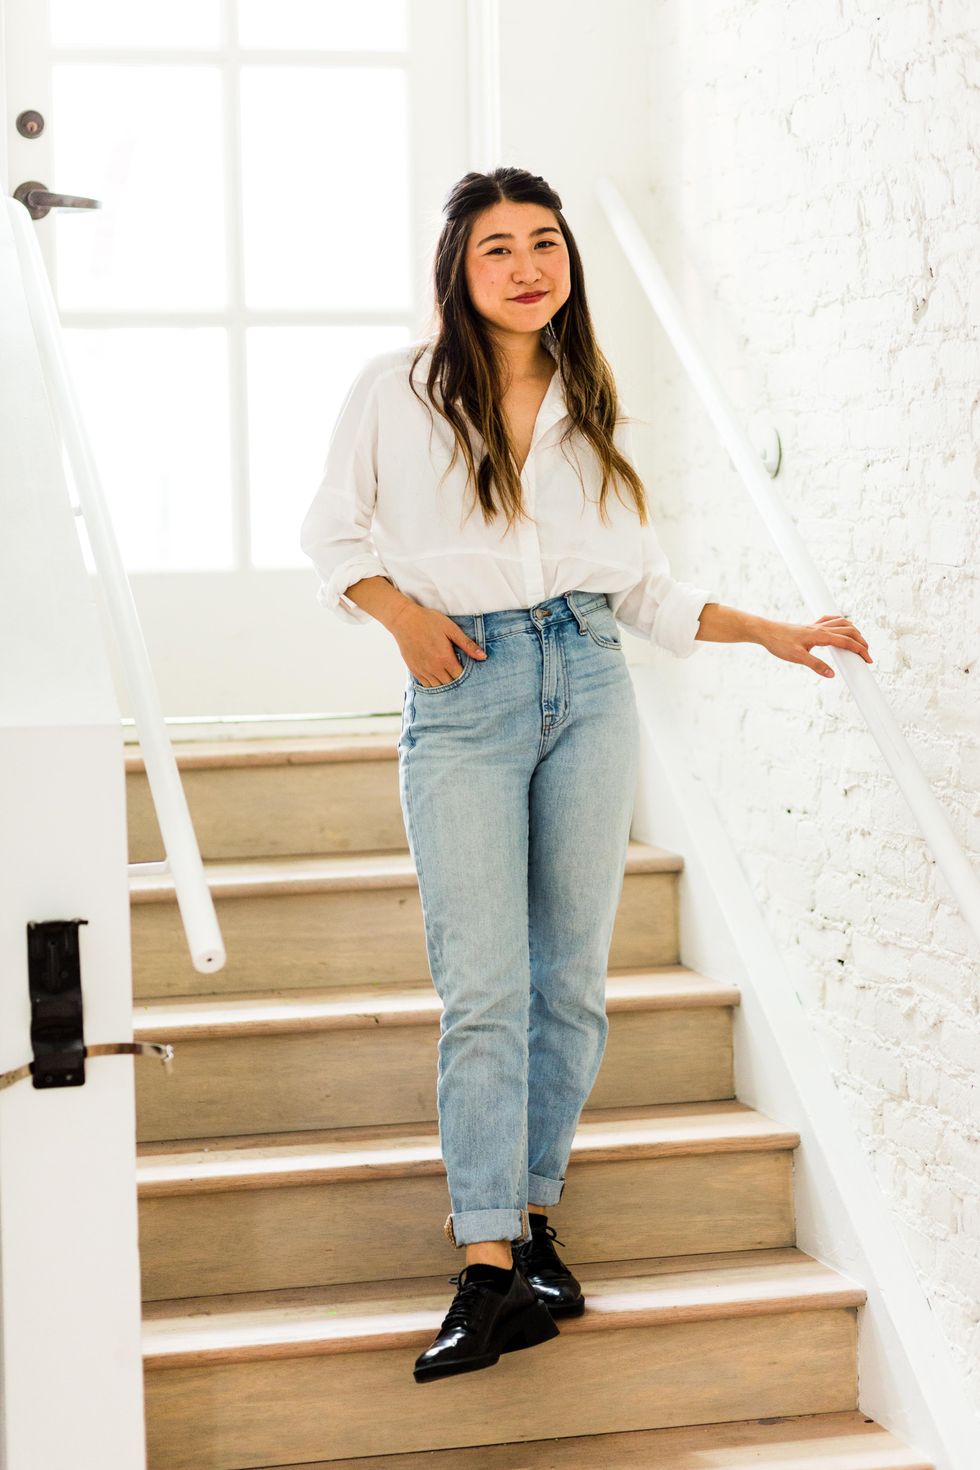 model on the stairs in a white blouse and jeans